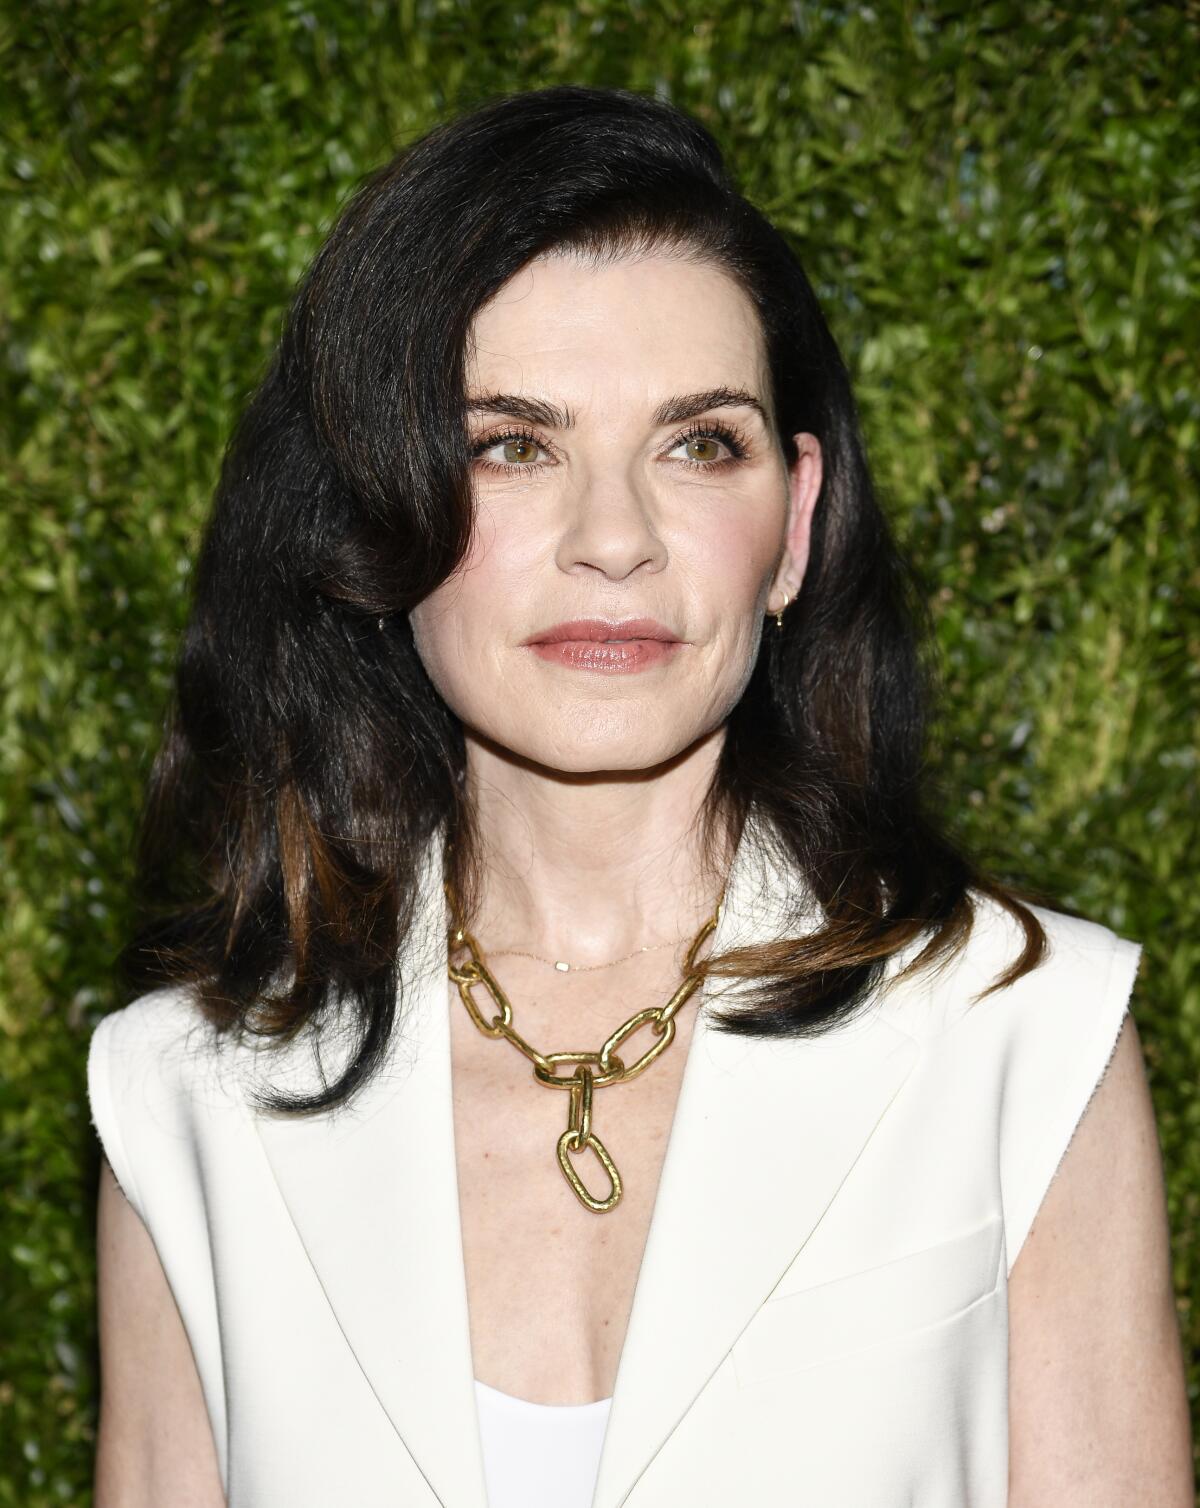 Julianna Margulies wears a cream colored vest over a white blouse with a chunky gold chain necklace.